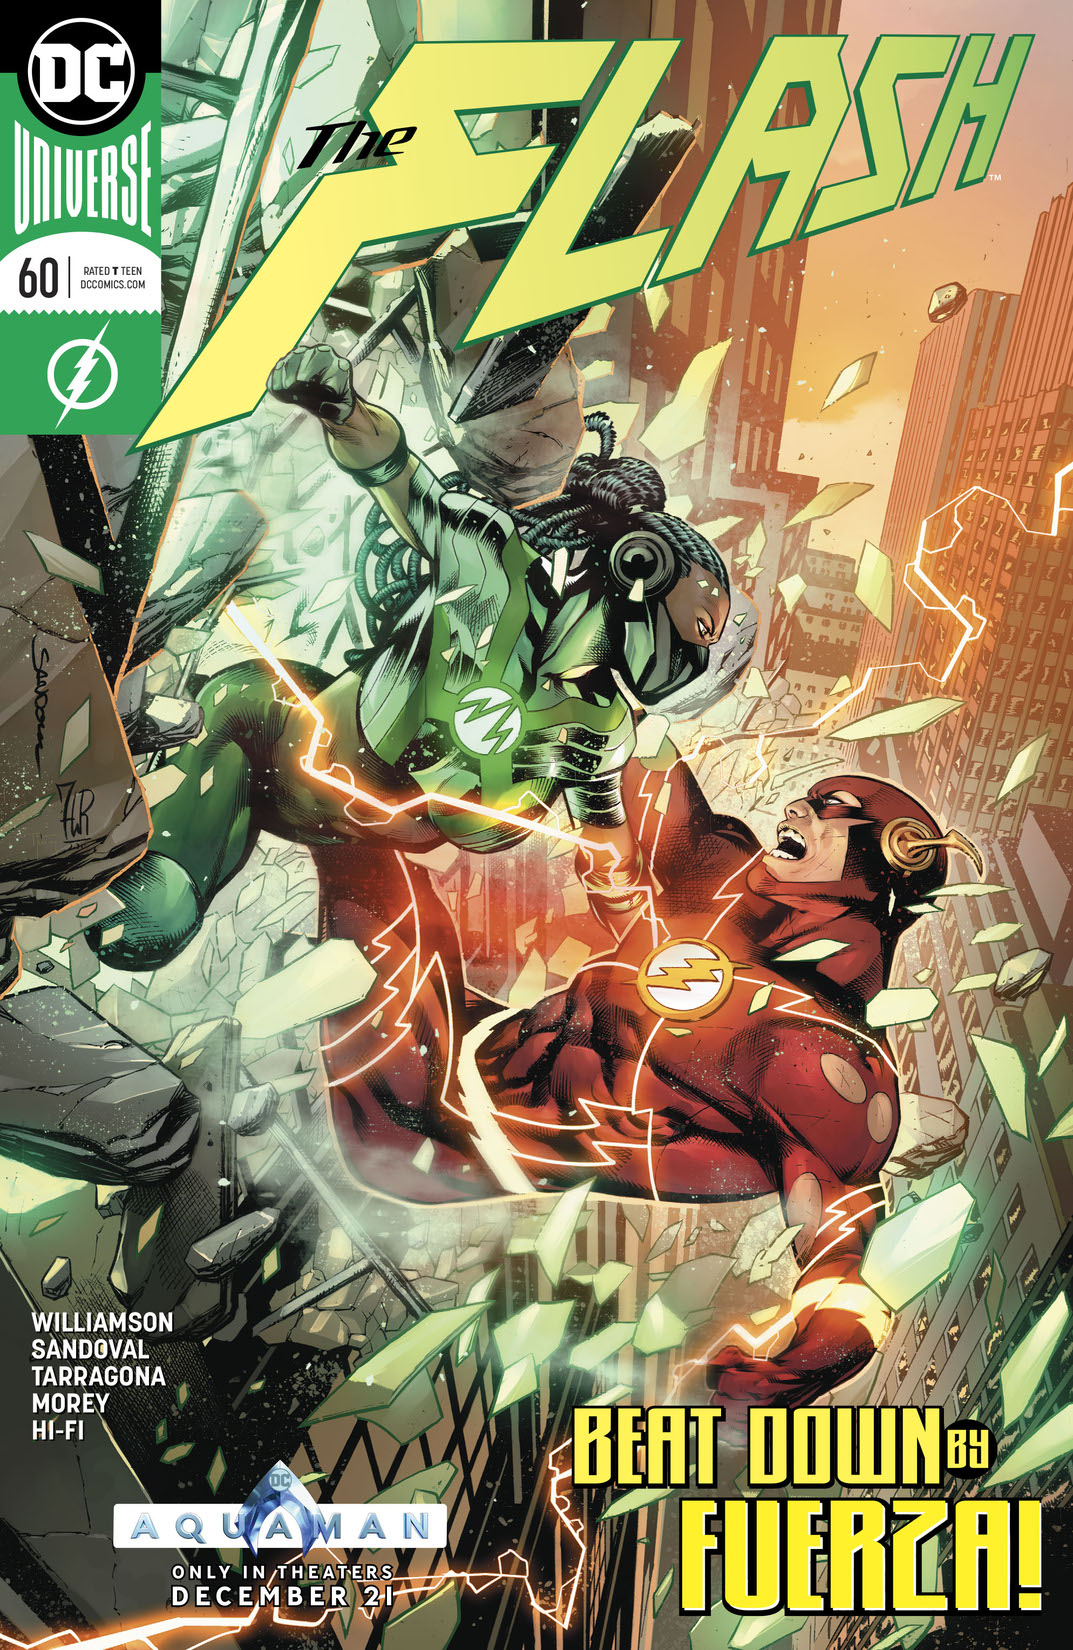 The Flash (2016-) #60 preview images